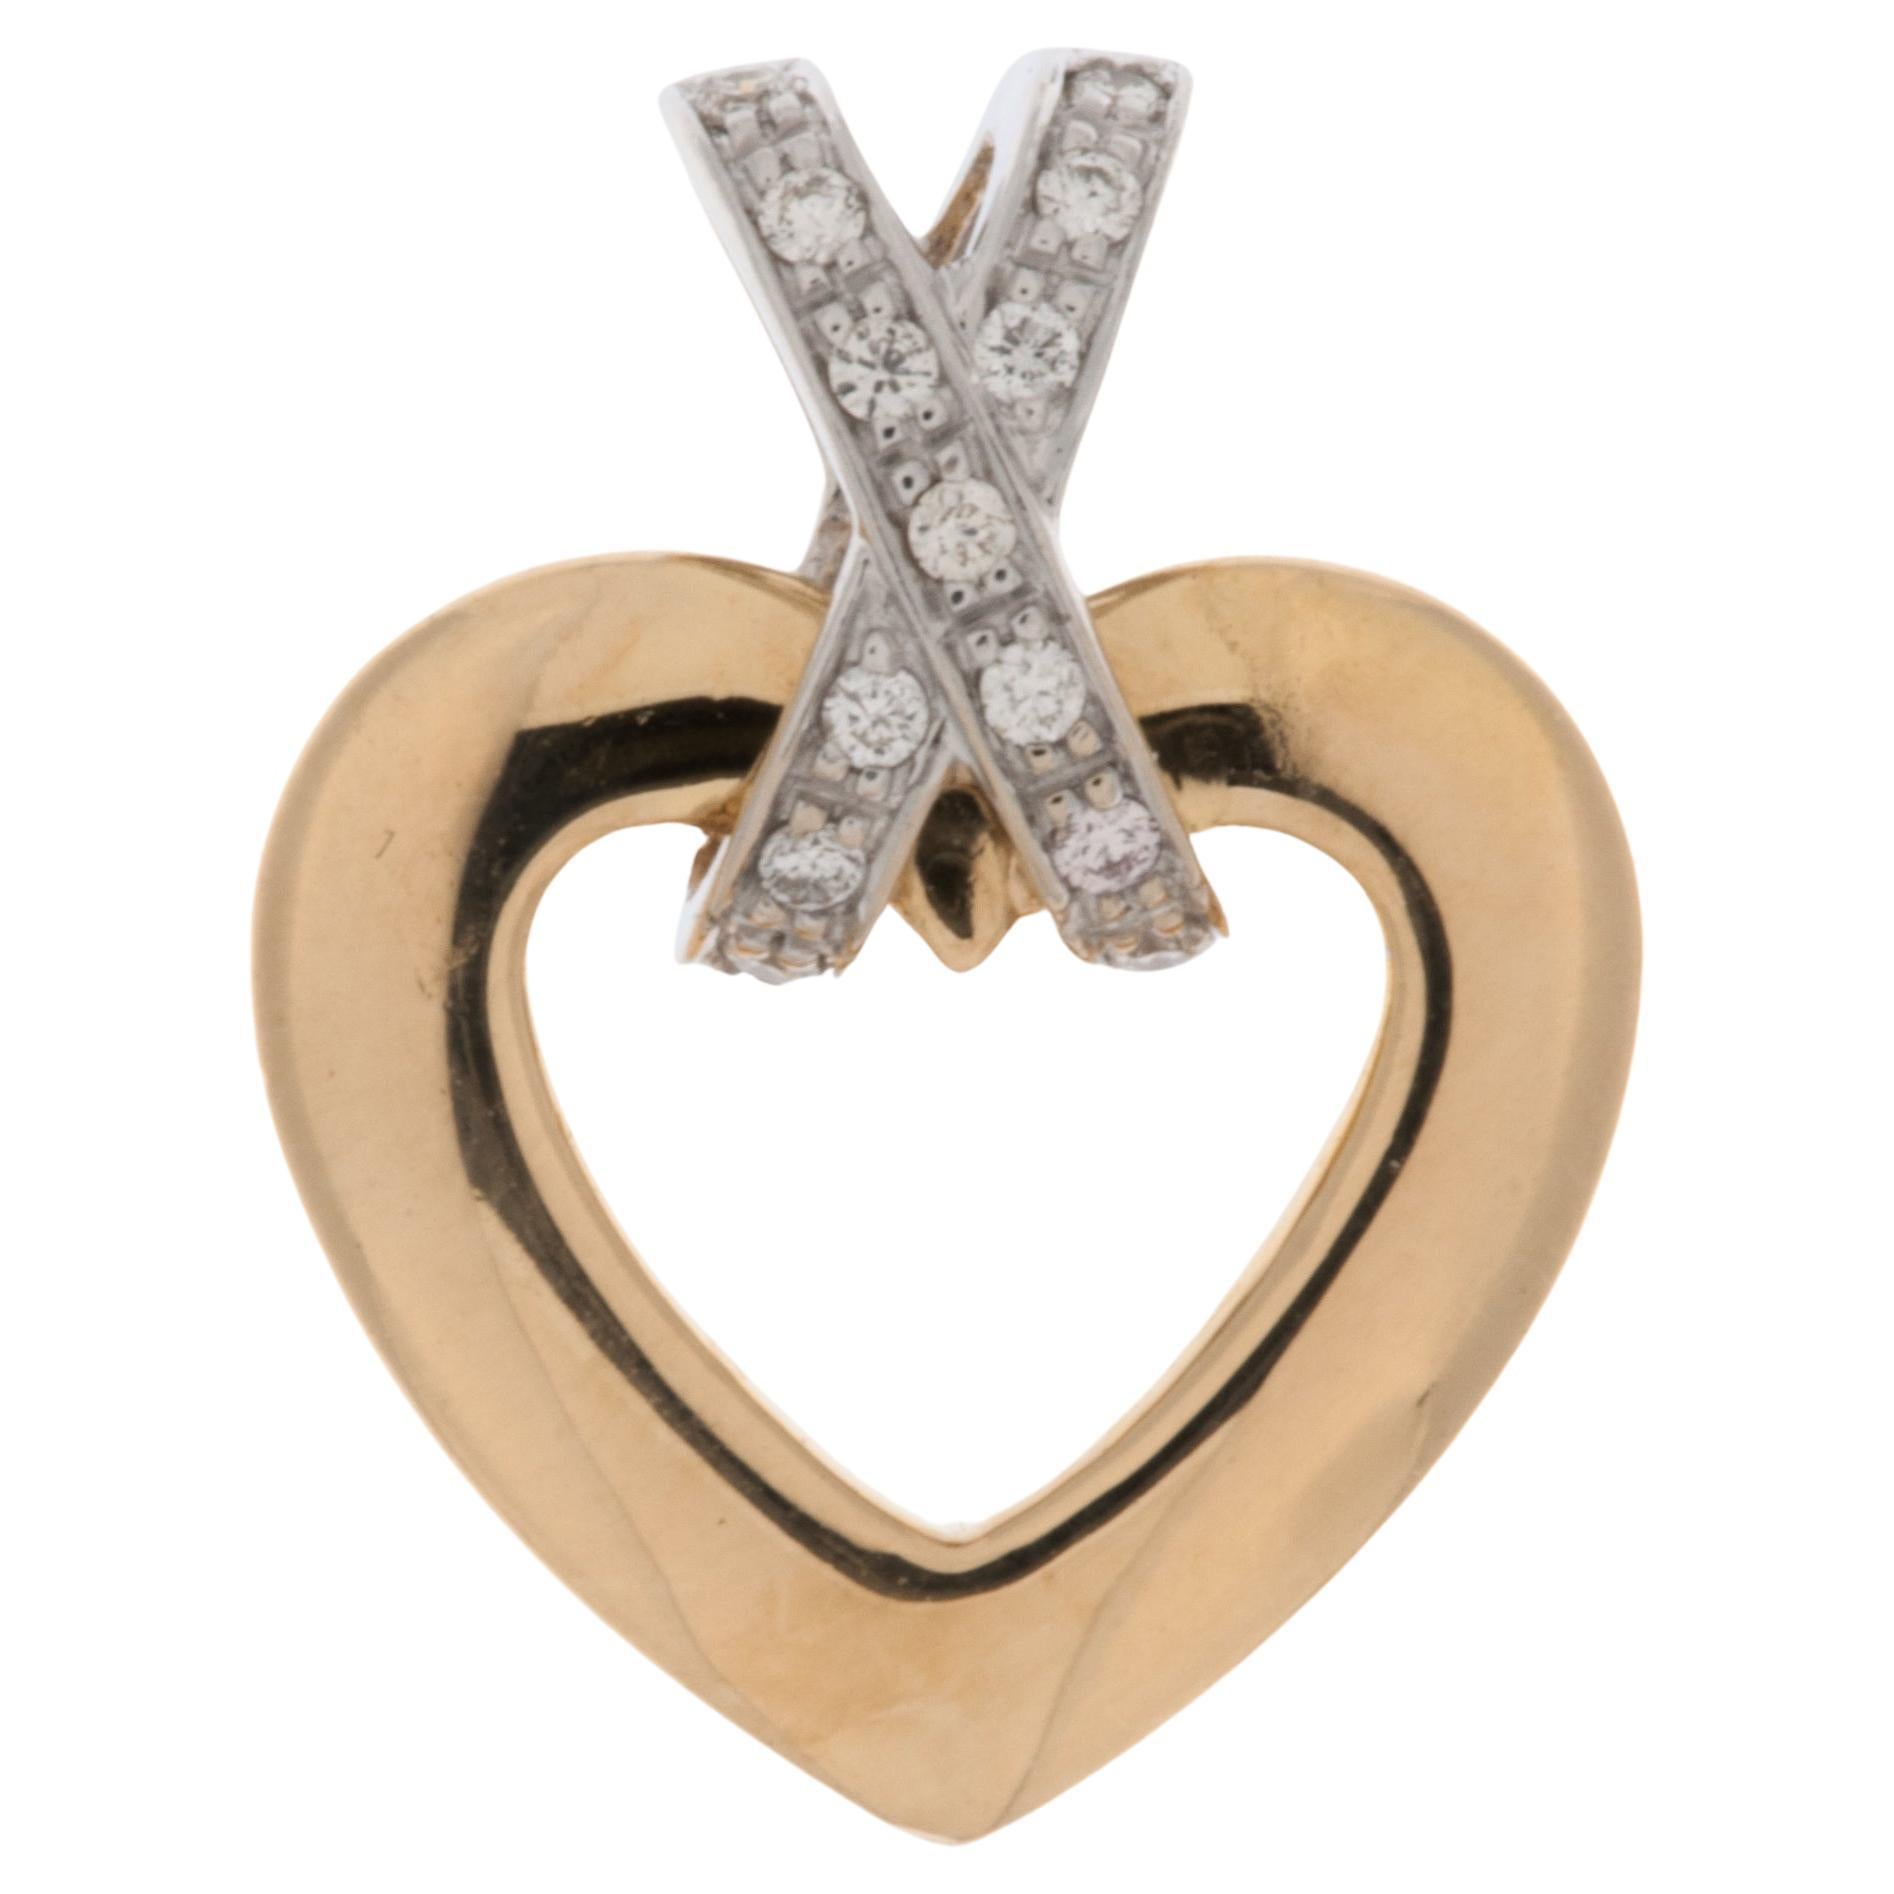 French 18 karat Yellow and White Gold Heart Pendant with Diamonds